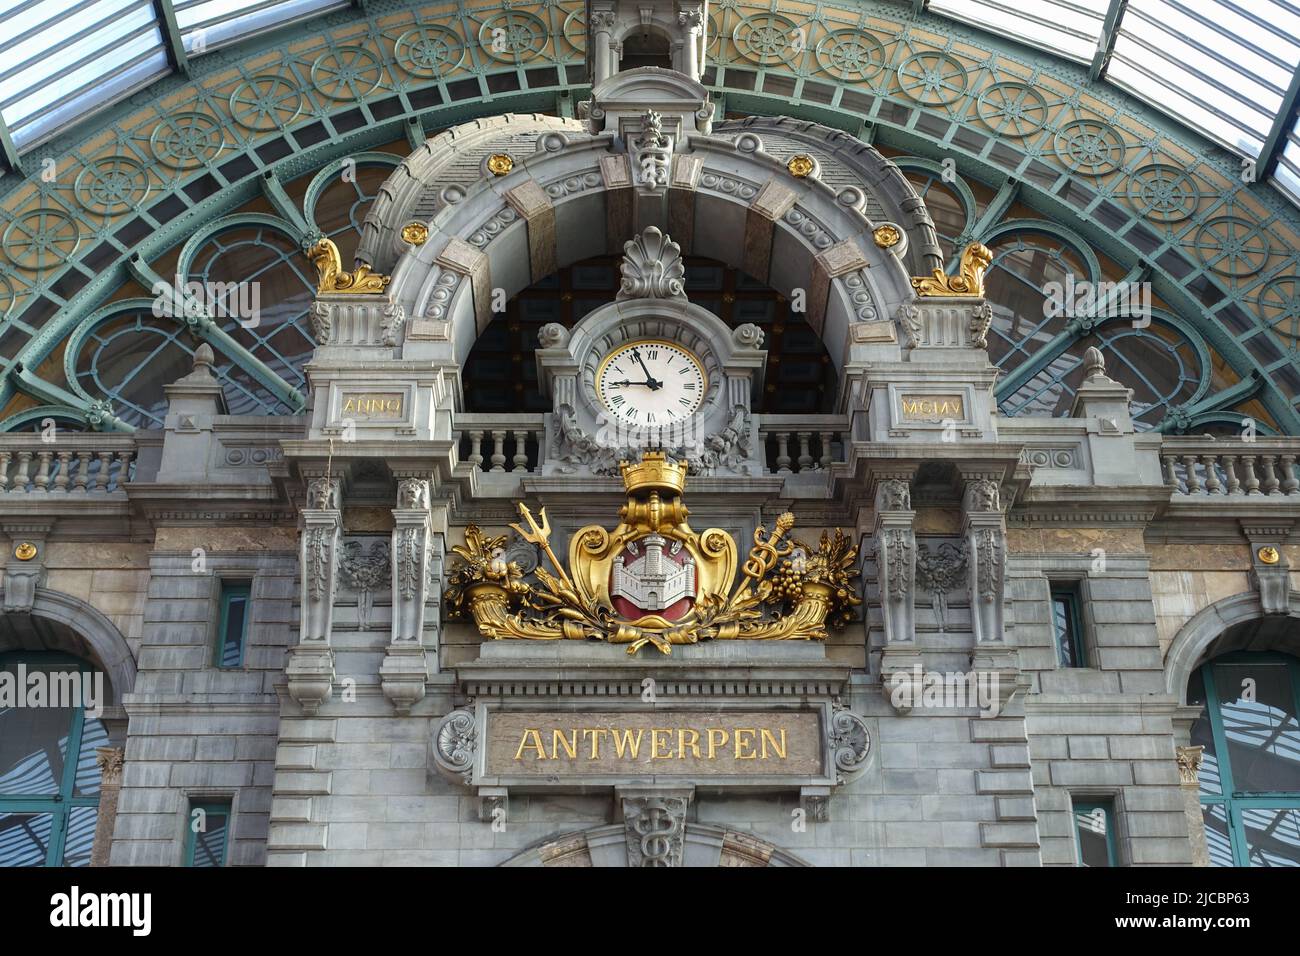 Antwerpen, Belgium - Jul 11, 2021: Historical ornaments and clock at Antwerp Centraal Station. Stock Photo